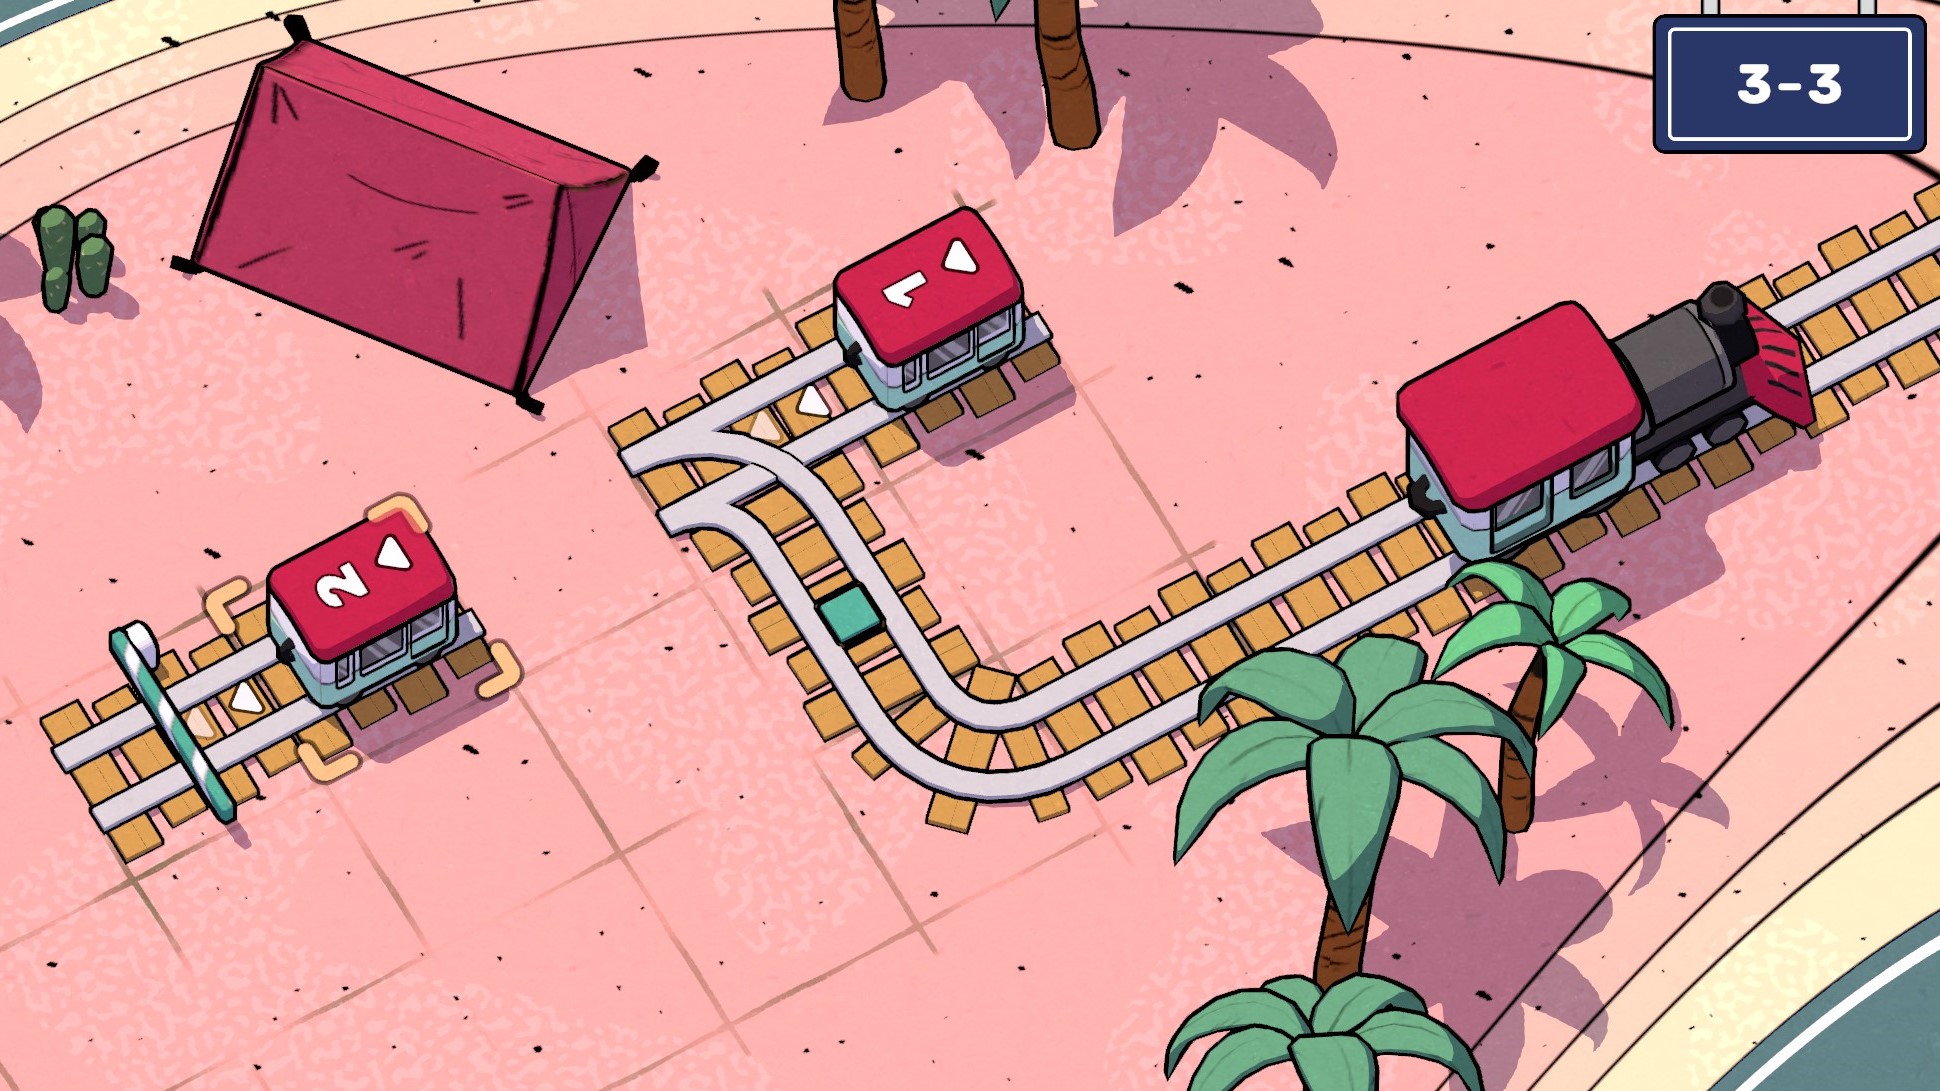  All I want to do is put down little rails to help these little trains get home in this delightful little puzzle game 